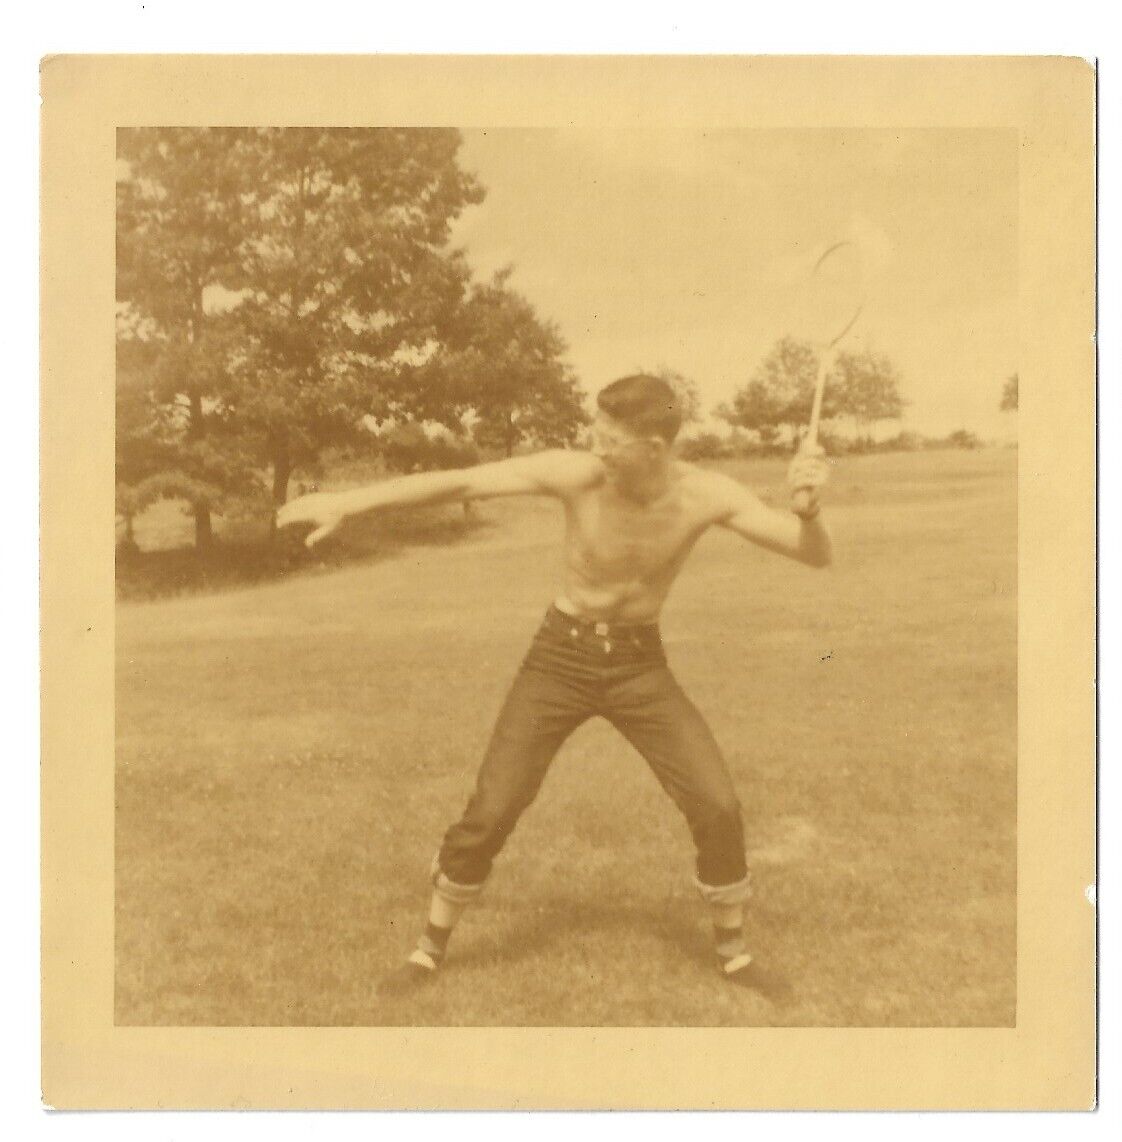 Vintage 1950s Photo SHIRTLESS TRIM PHYSIQUE MAN with TENNIS RACKET Gay